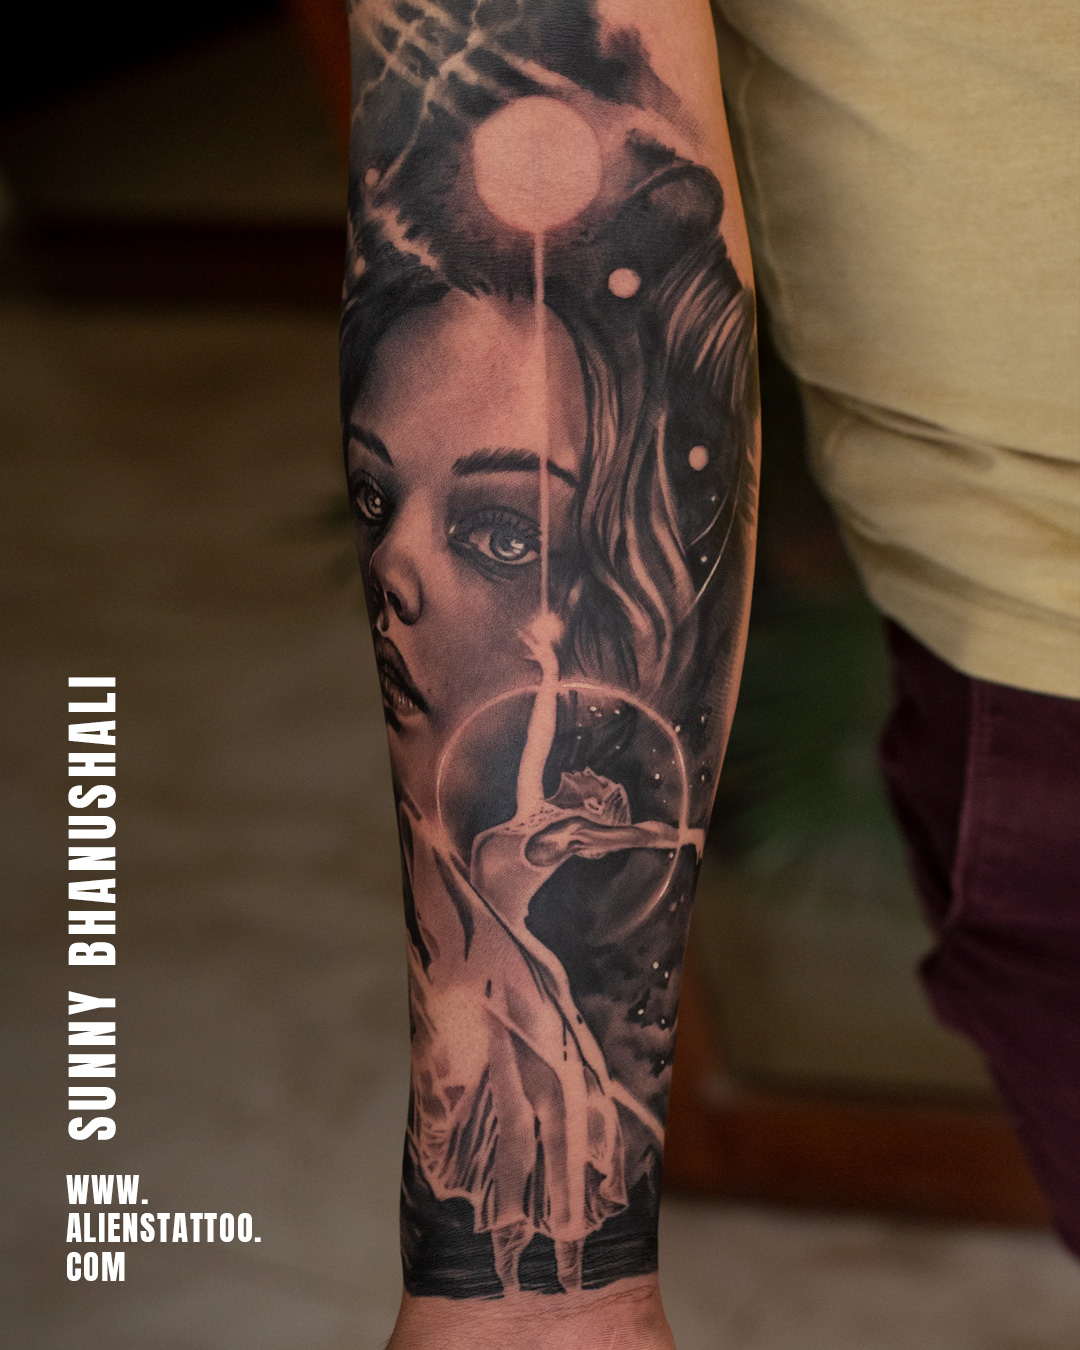 Mahima Bhanushali ✨ | Lord shiva tattoos are among the most elaborately  designed tattoo. Positives vibes and spirituality are primarily represented  by this sym... | Instagram